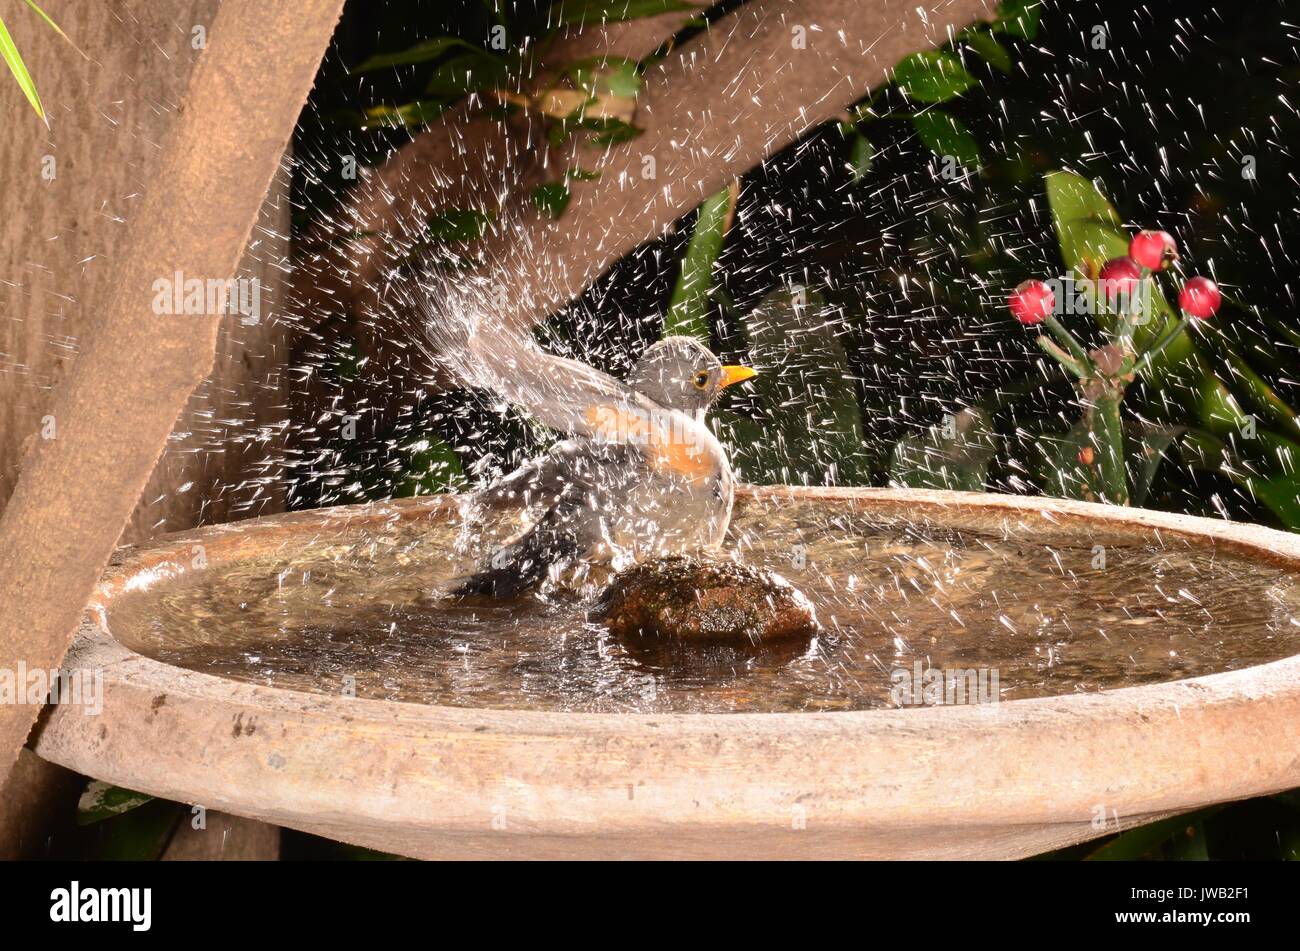 Olive thrush (TURDUS Olivaceus) bathing in a garden bird bath. Forages on ground, running, stopping and pecking on ground or leaf litter. Quite tame. Stock Photo